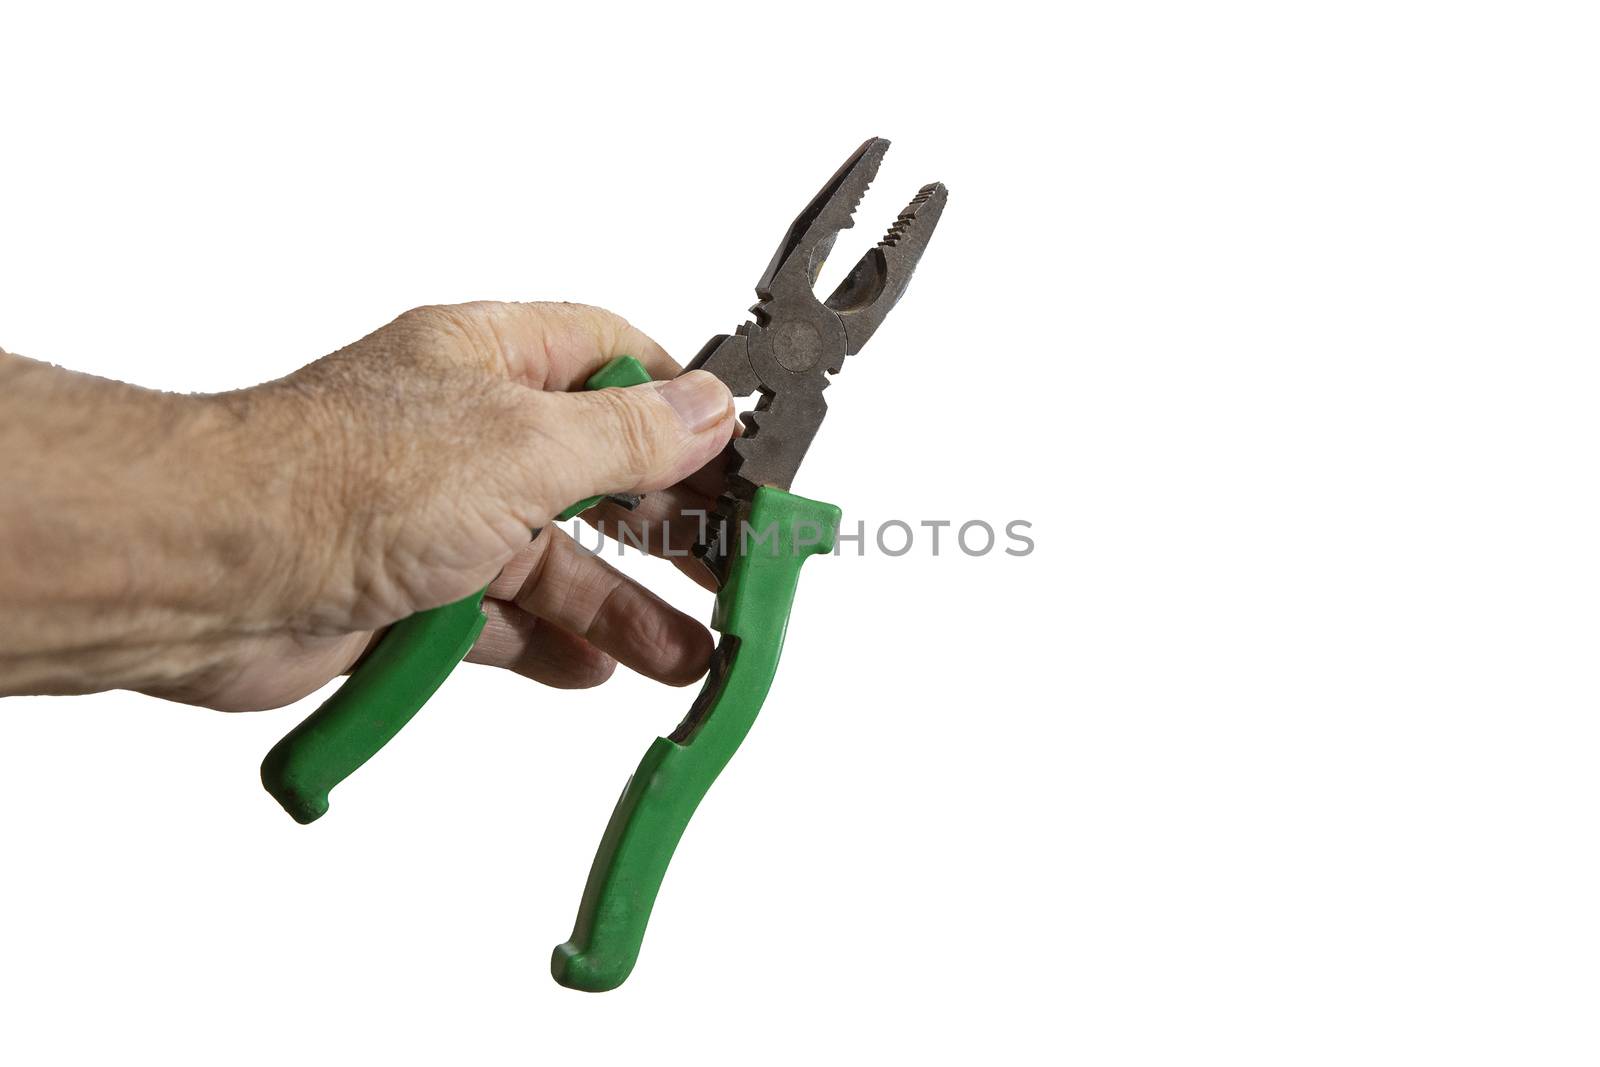 Combination pliers for electrical work by ben44